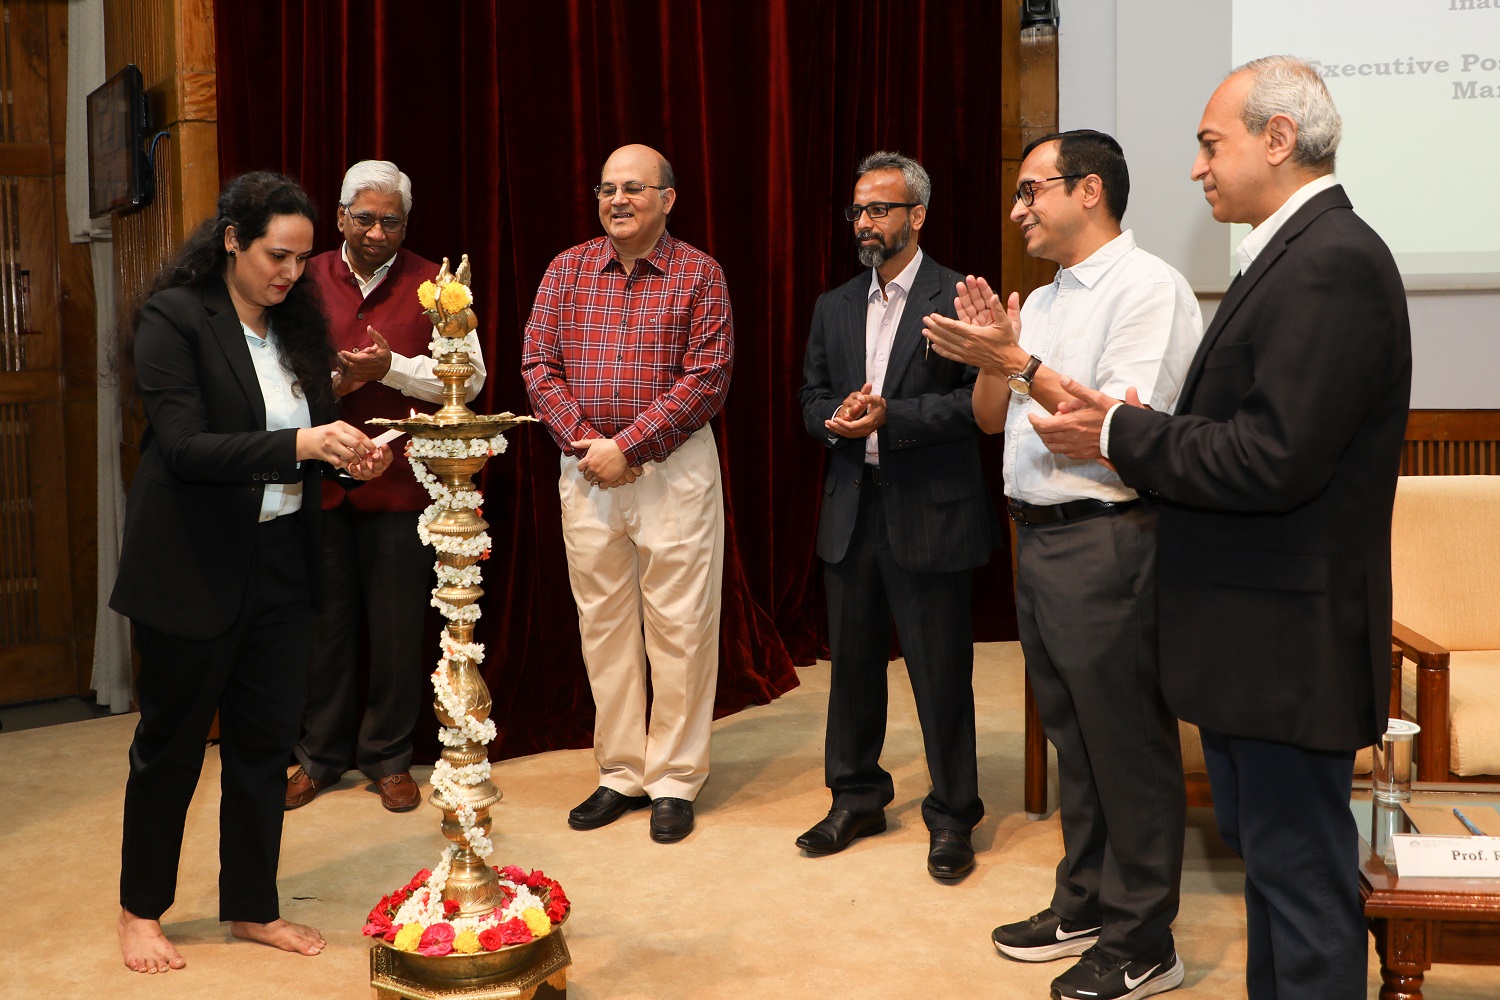 EPGP student lights the lamp at the inauguration of the EPGP Program on 25th March 2023. Prof. Rajendra K Bandi, Dean Administration, IIMB, Prof. Rishikesha T Krishnan, Director, IIMB, Amith Parameshwara, former Managing Director, Accenture Strategy and Consulting, Prof. Ashis Mishra, Chairperson, Admissions and Financial Aid, IIMB, Prof. Ashok Thampy, Chairperson, EPGP, IIMB, looks on.